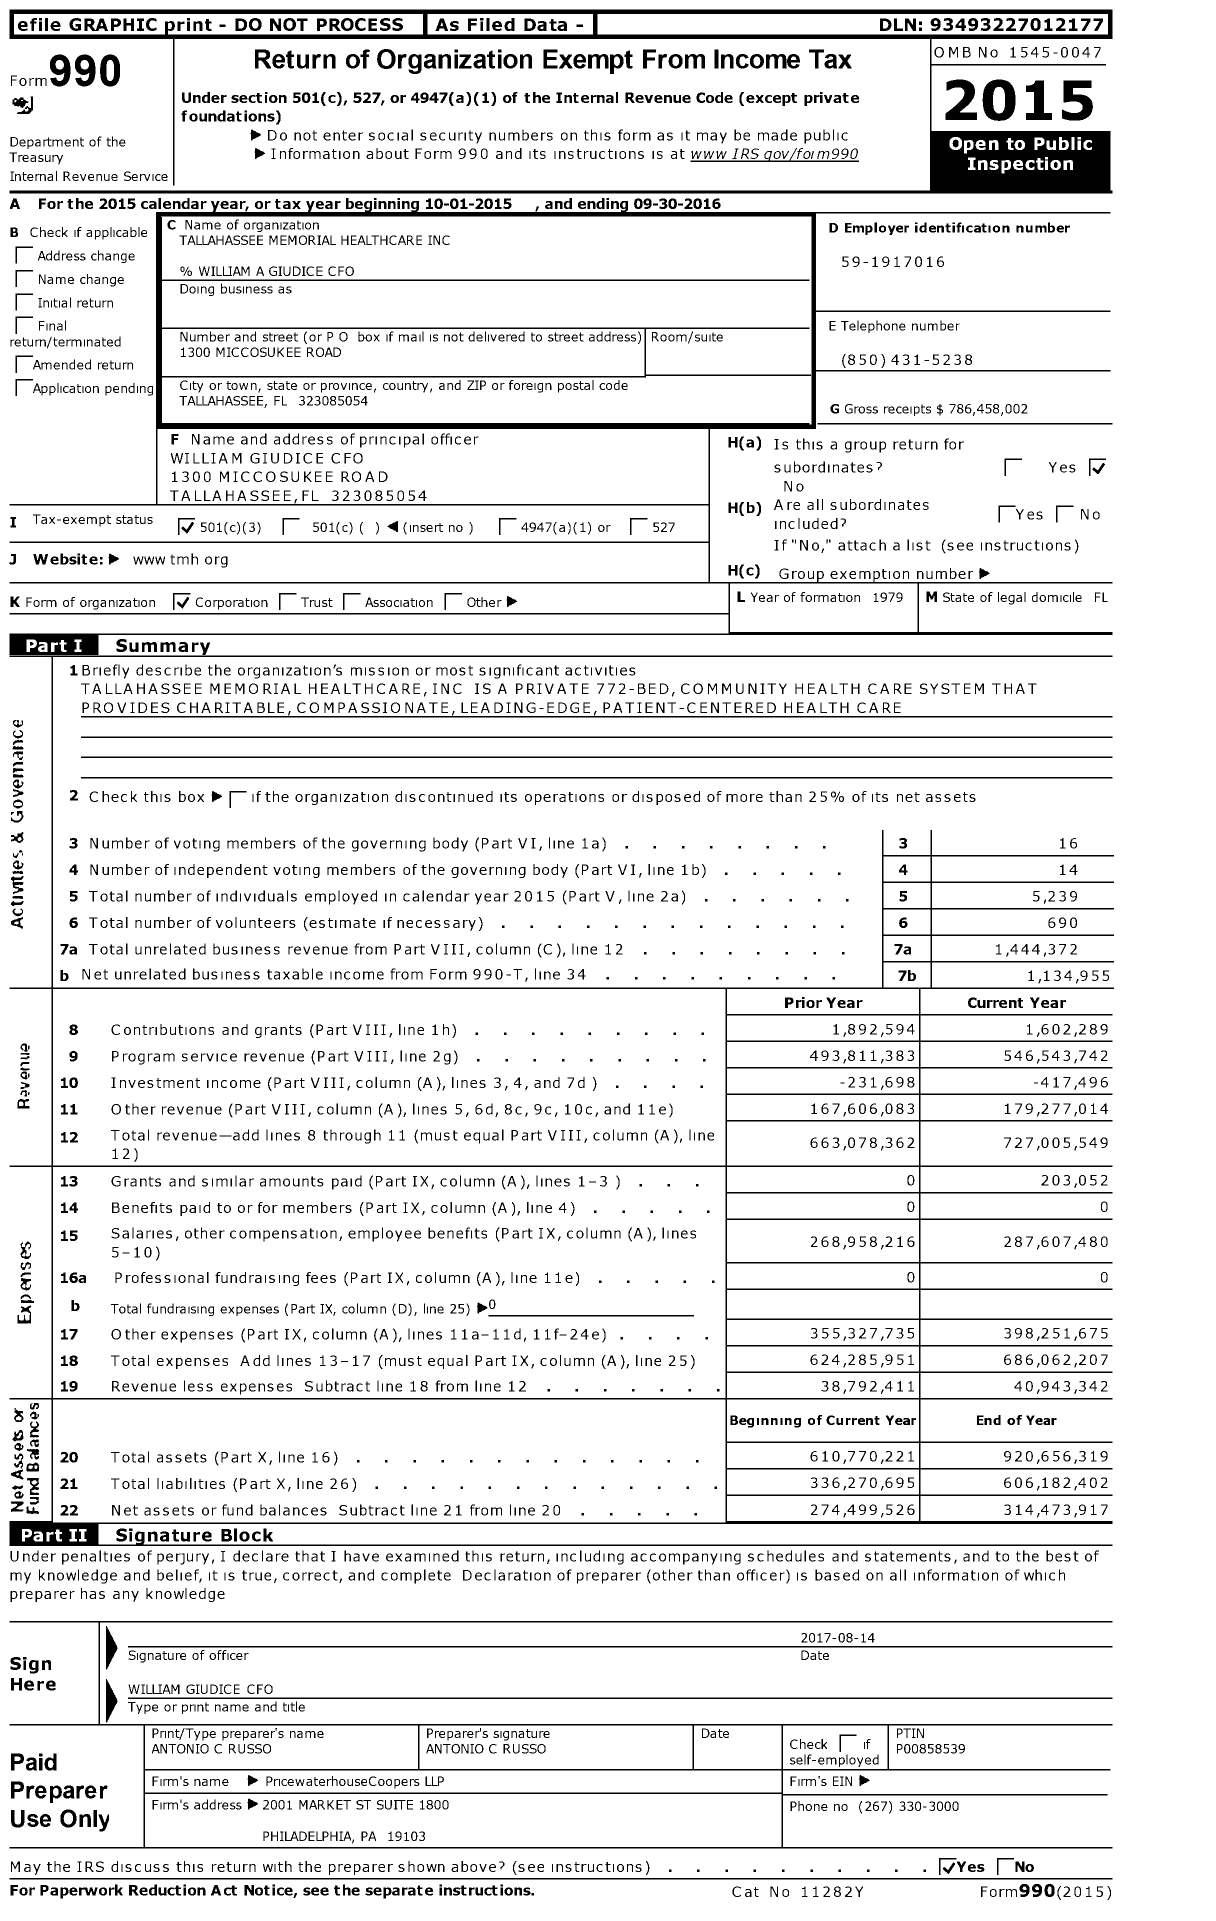 2016-form-990-for-tallahassee-memorial-healthcare-tmh-cause-iq